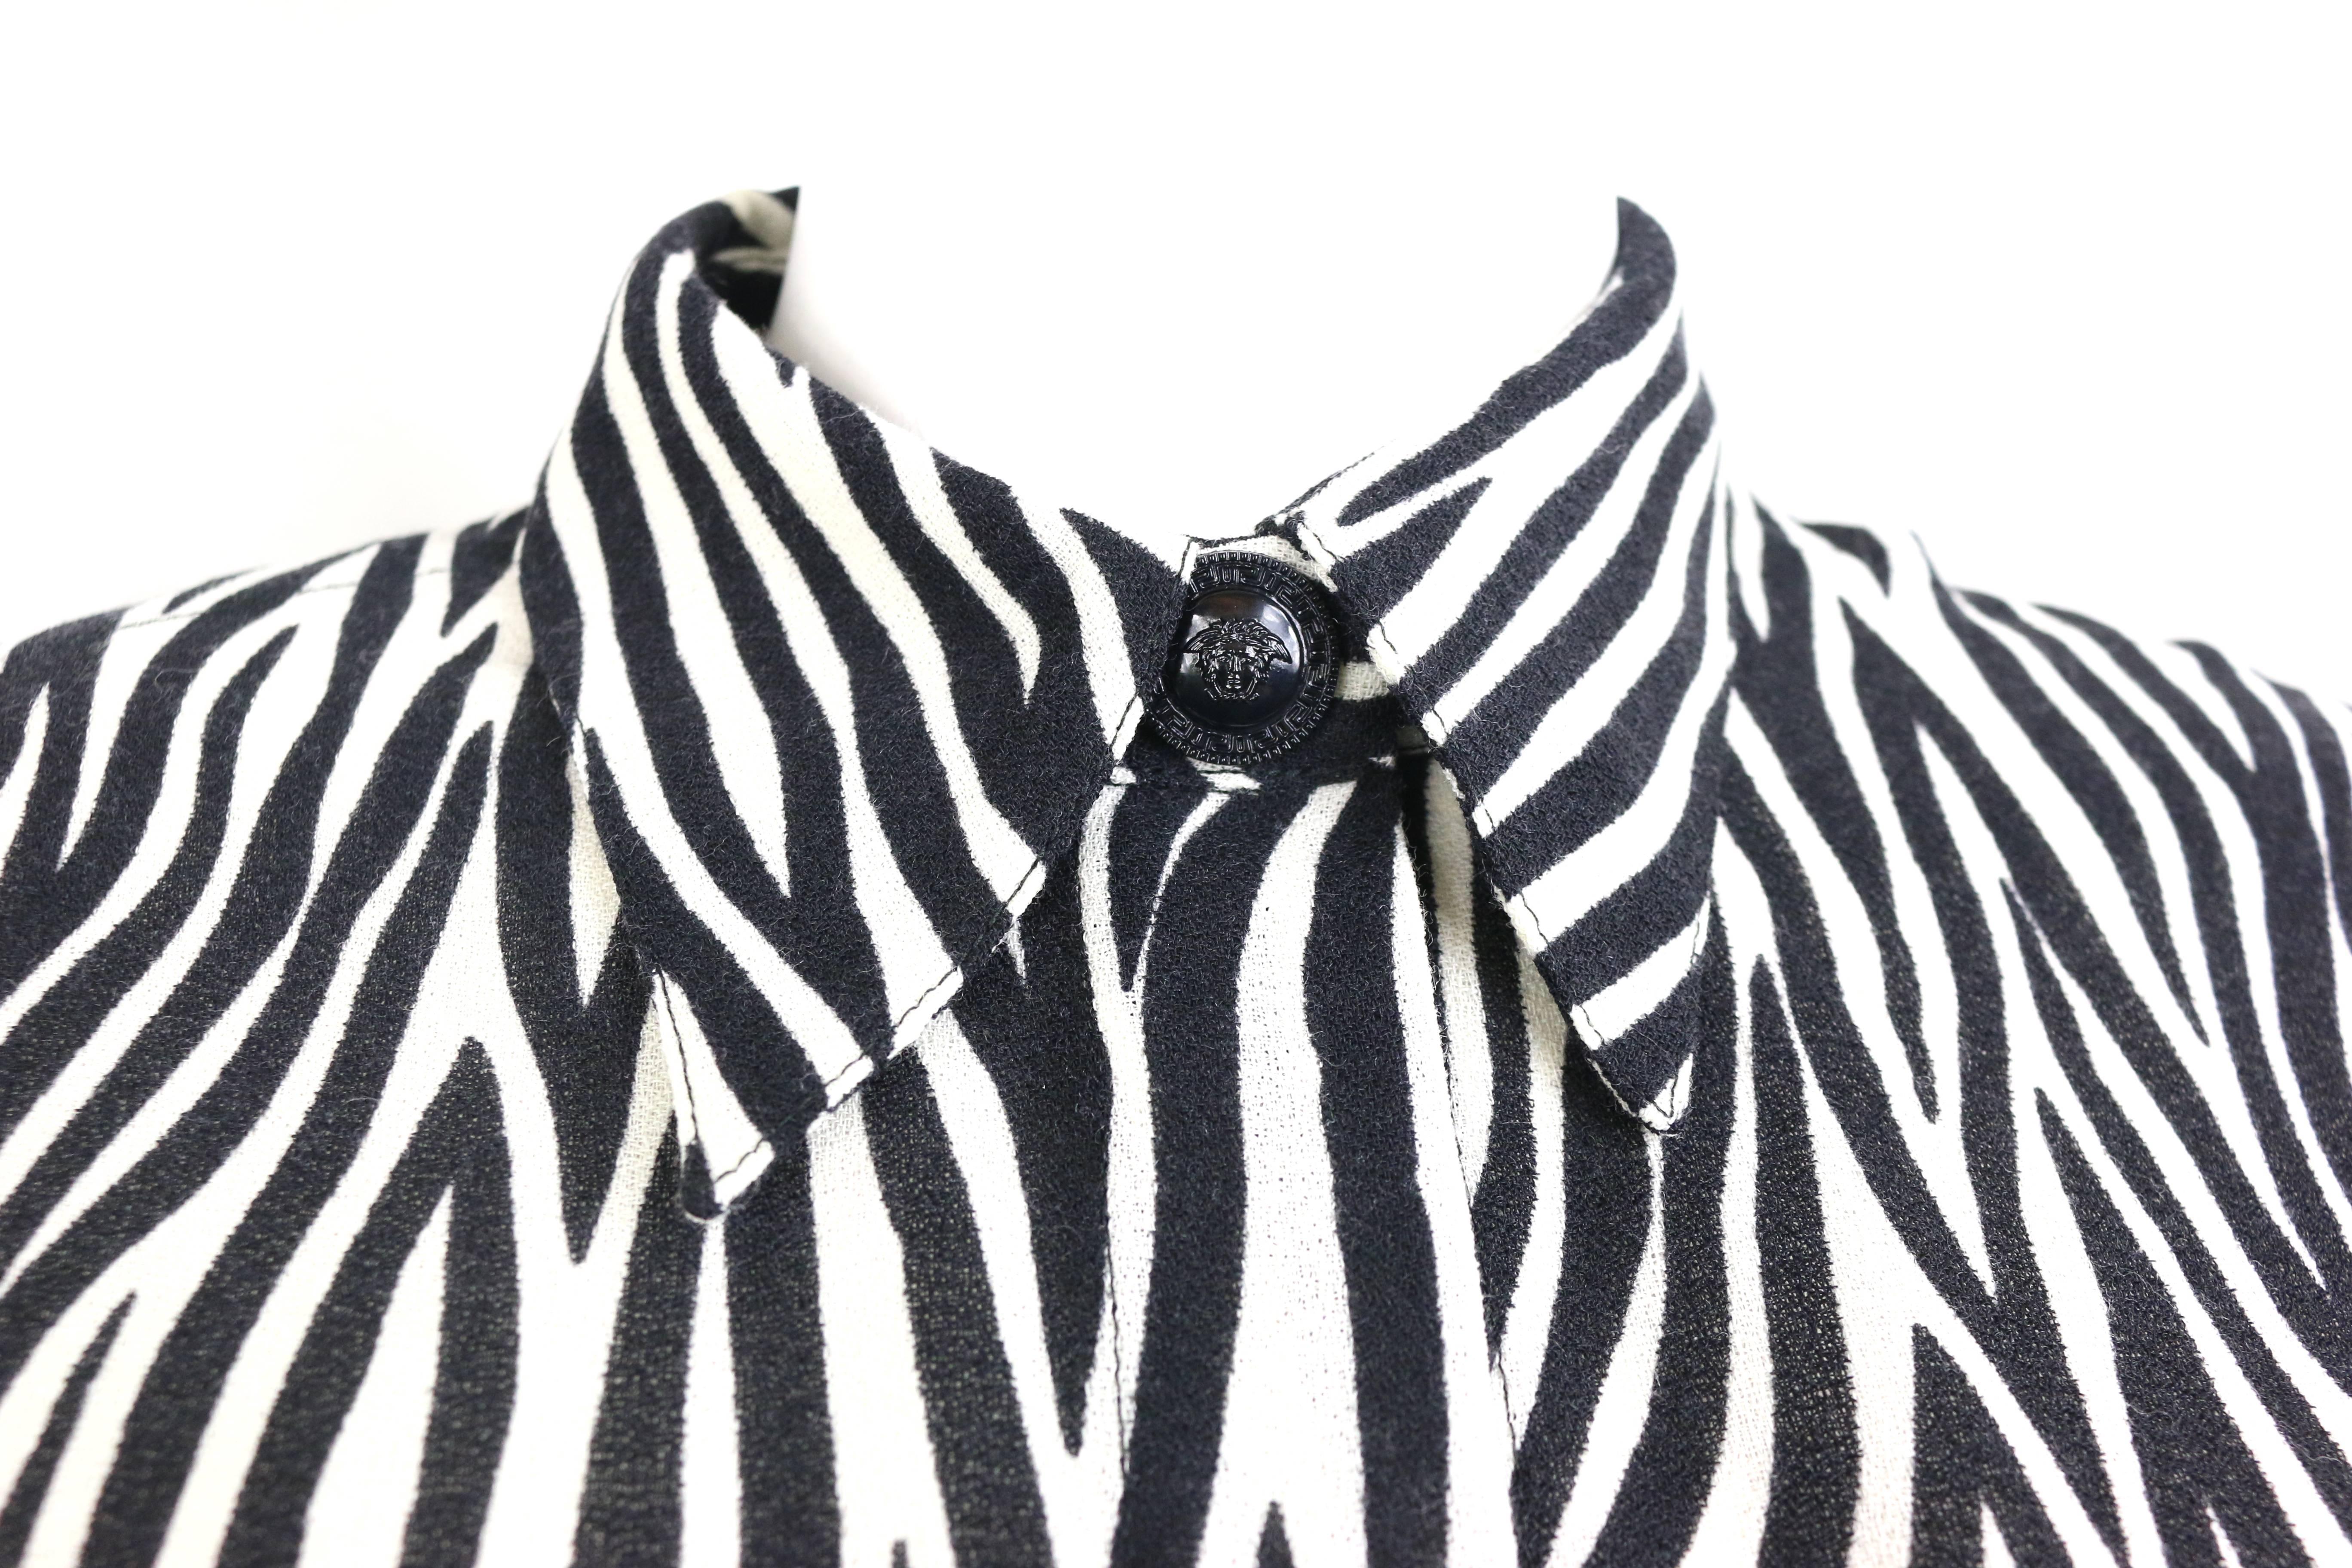 - Vintage 1996 Gianni Versace Couture black and white wool zebra pattern shirt. 

- Featuring black buttons fastening with a top plastic black 